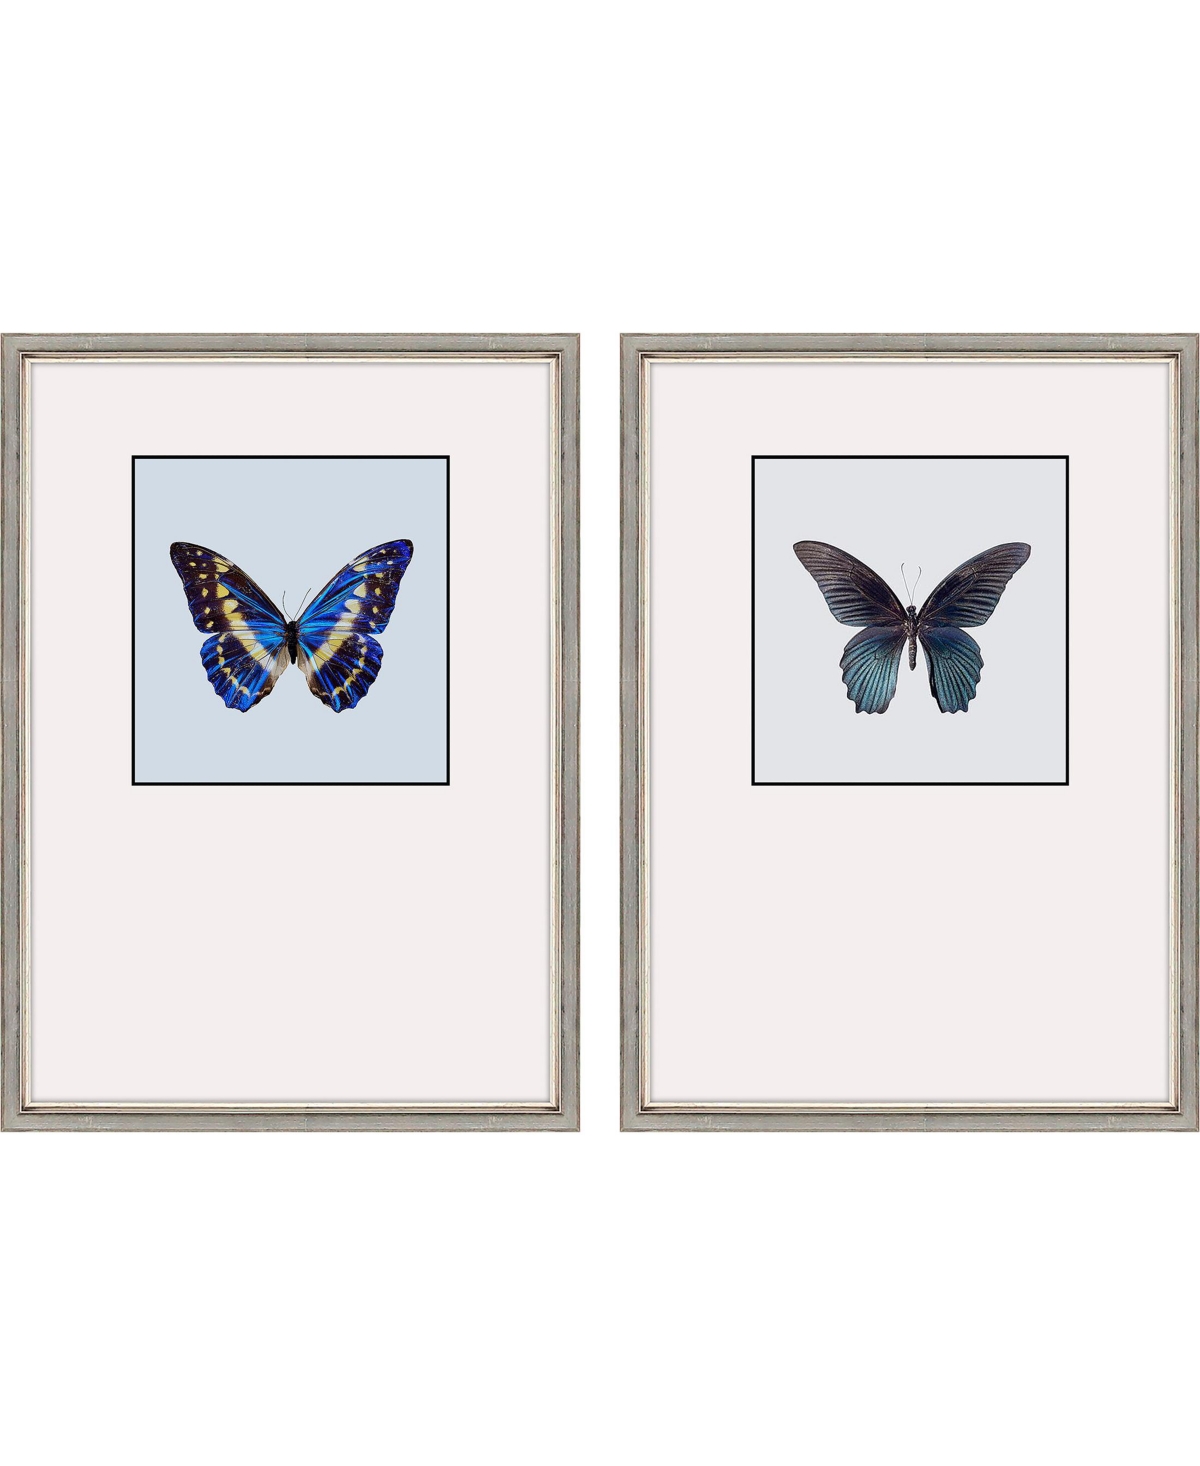 Paragon Picture Gallery Great Butterfly Ii Framed Art, Set Of 2 In Black